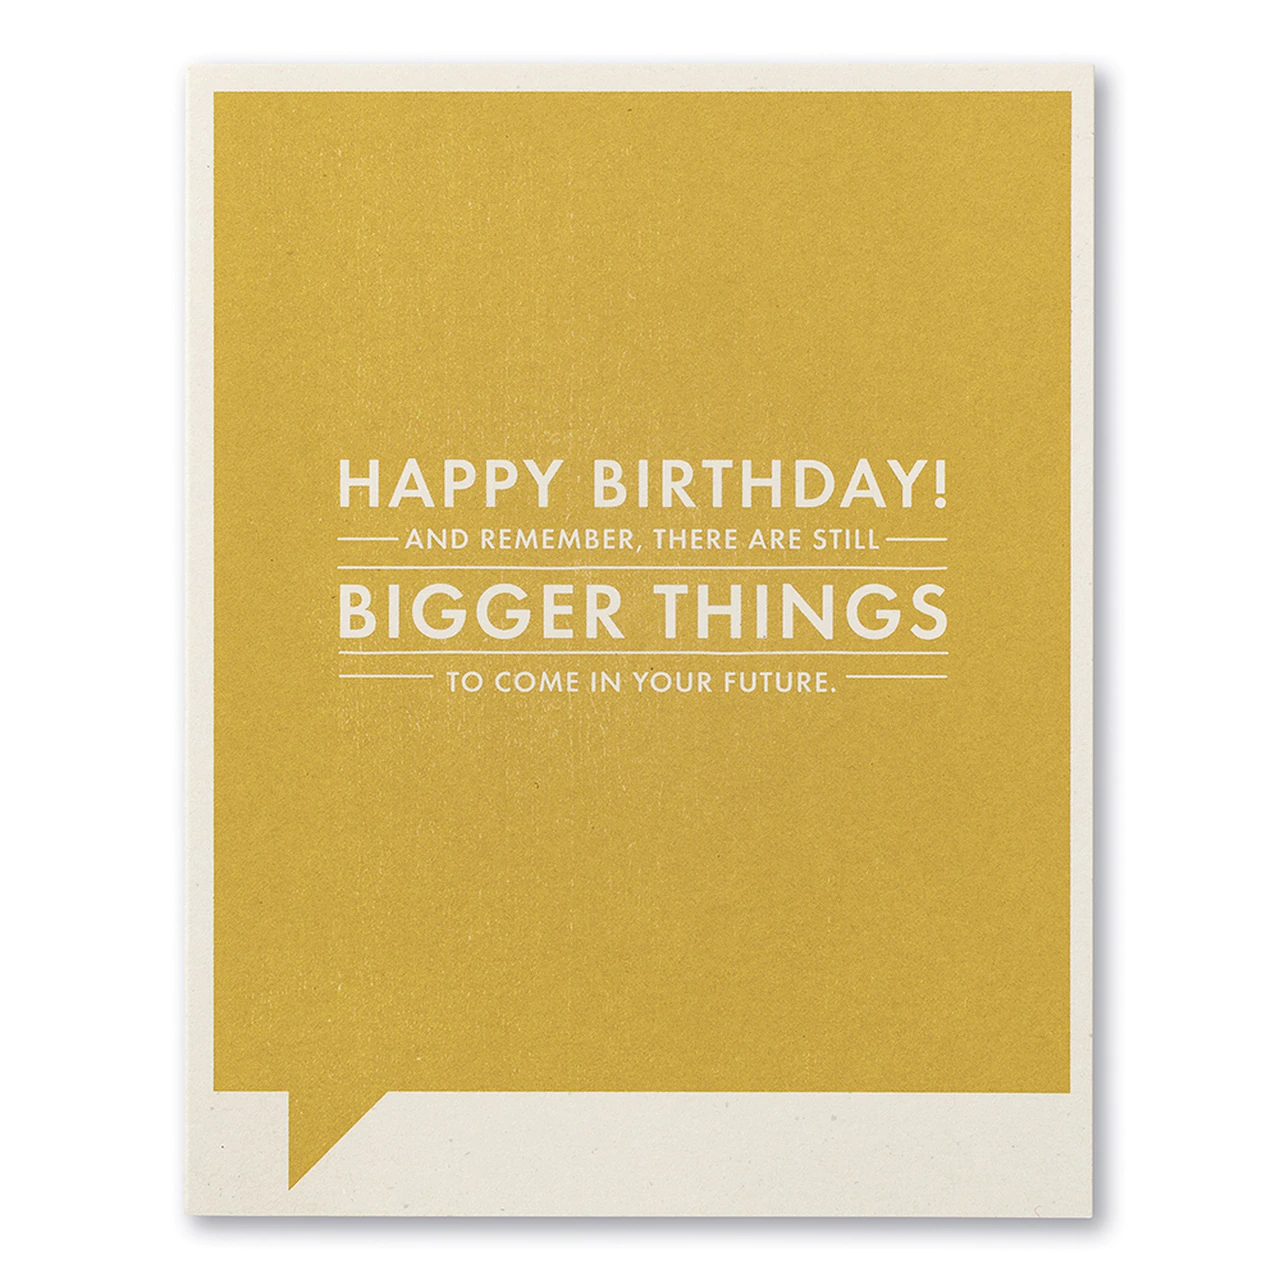 Frank and Funny Greeting Card - Birthday - Happy Birthday! And Remember, There Are Still Bigger Things To Come In Your Future - Mellow Monkey